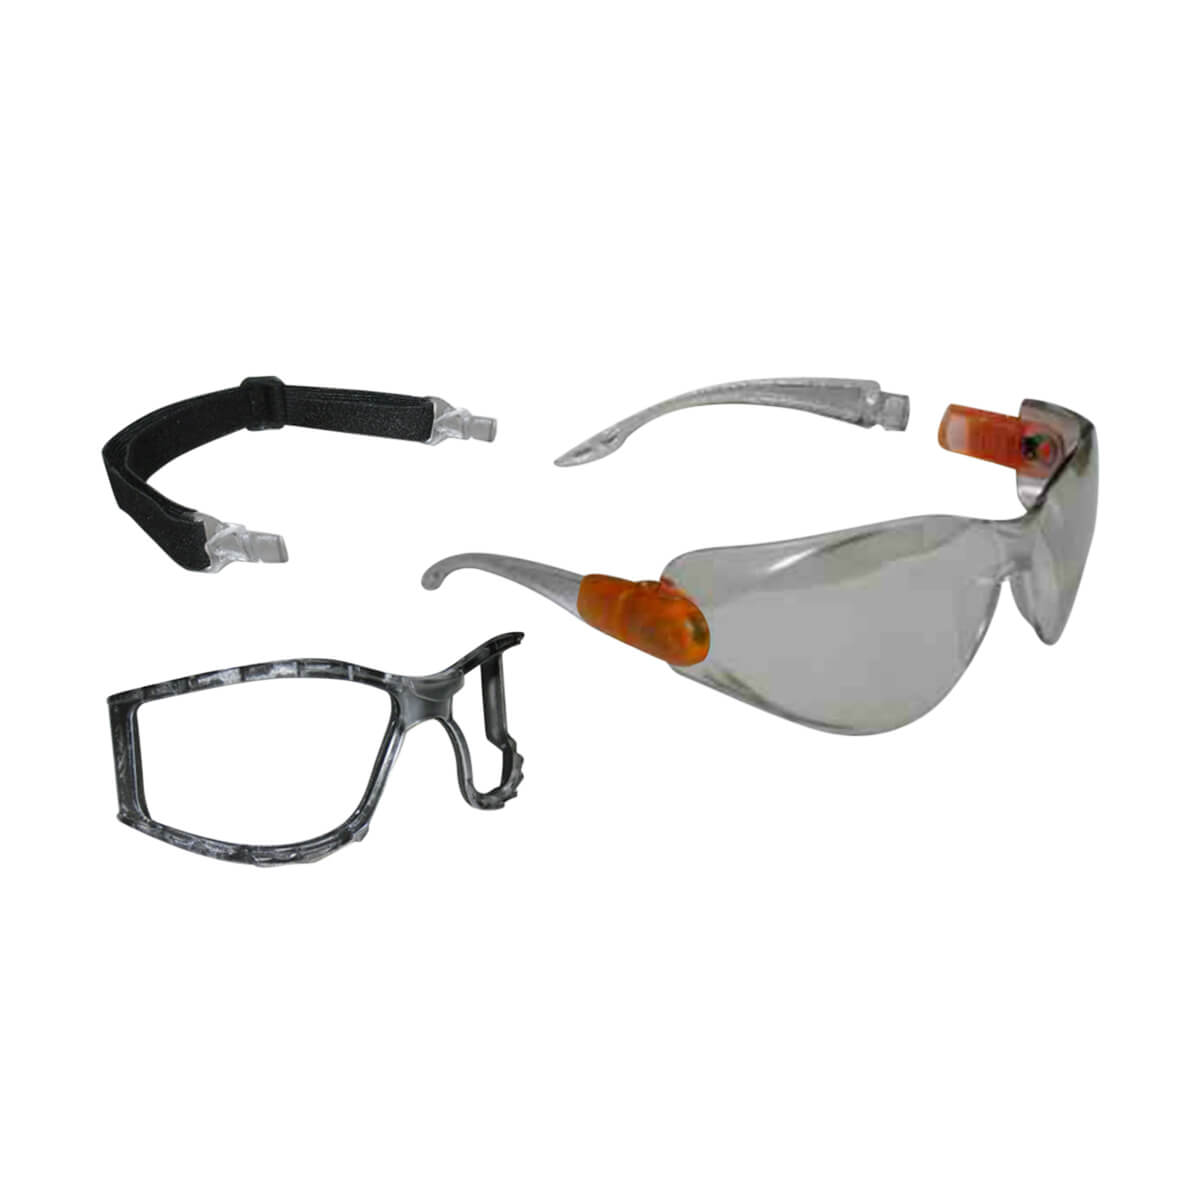 WorkHorse® 2-in-1 Safety Glasses - Clear Lens